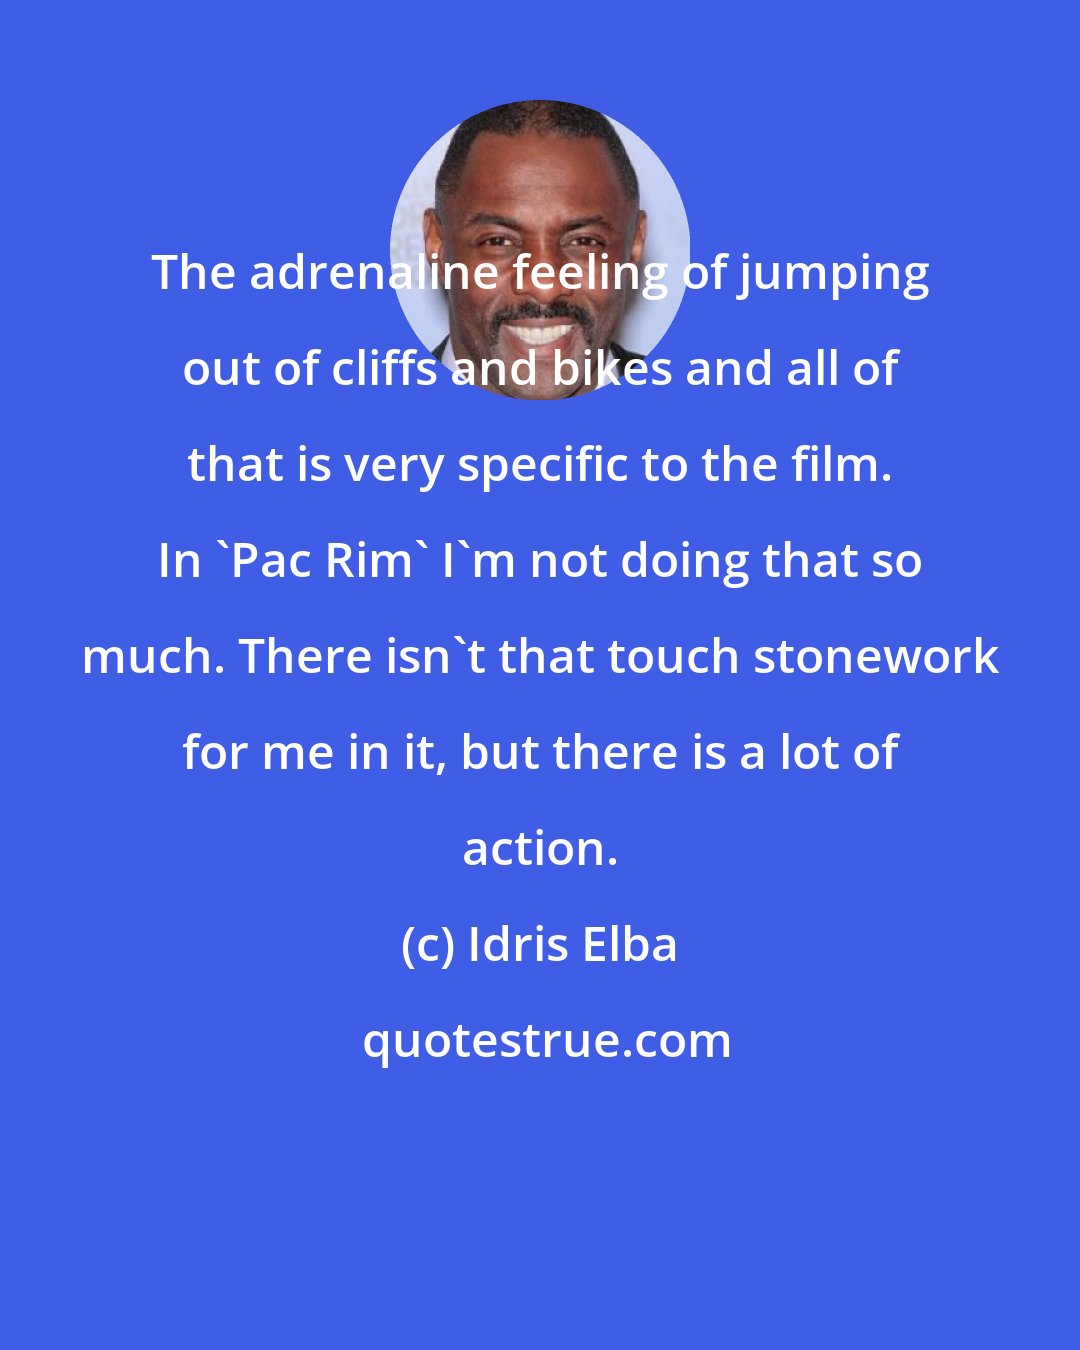 Idris Elba: The adrenaline feeling of jumping out of cliffs and bikes and all of that is very specific to the film. In 'Pac Rim' I'm not doing that so much. There isn't that touch stonework for me in it, but there is a lot of action.